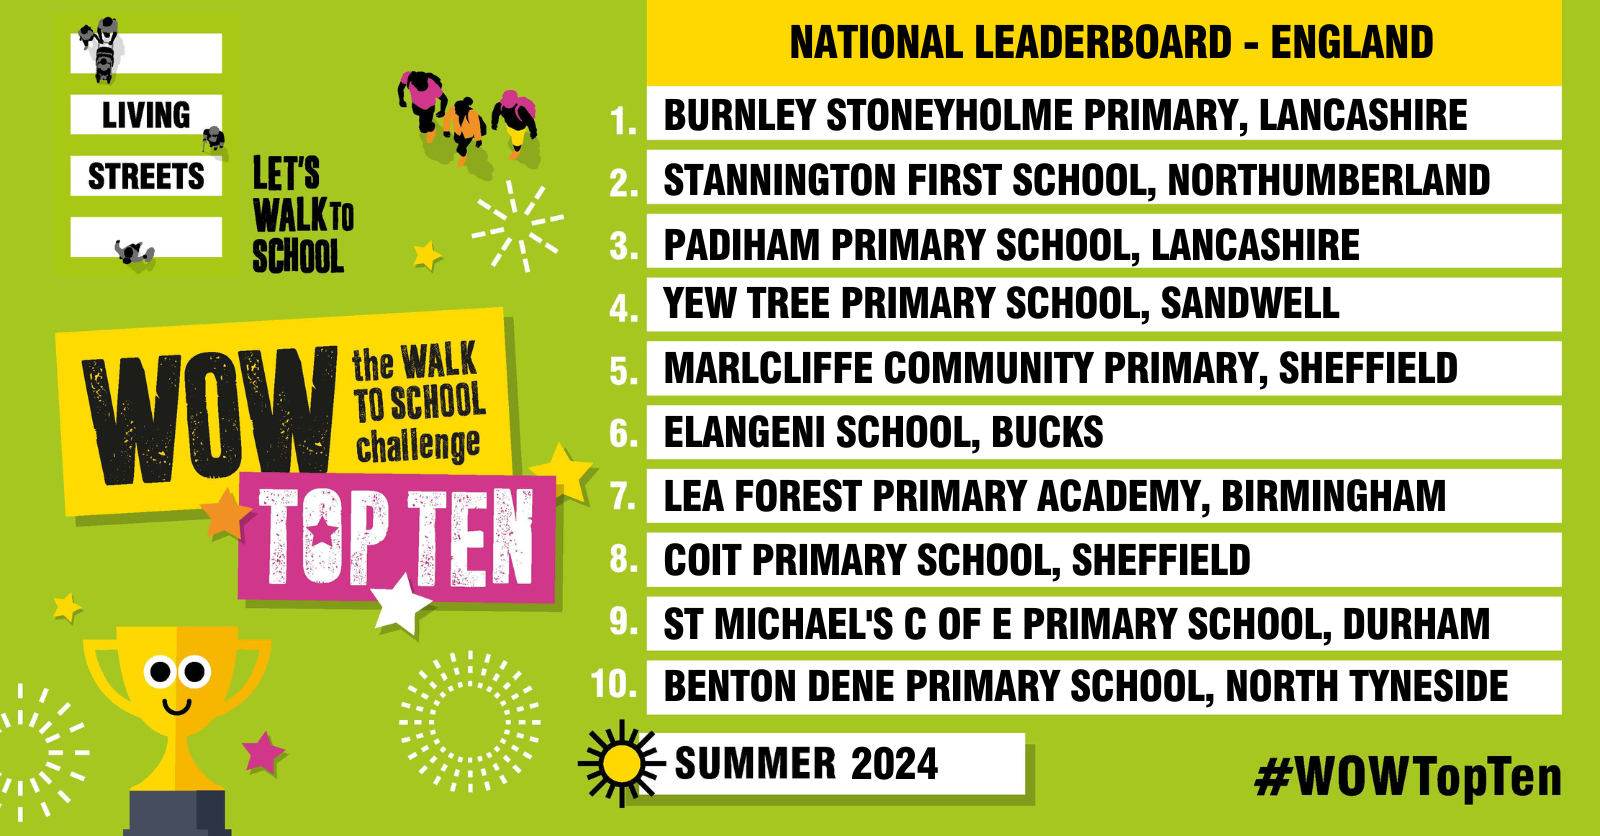 A leaderboard showing the top ten schools in England with graphics of a trophy and people walking.